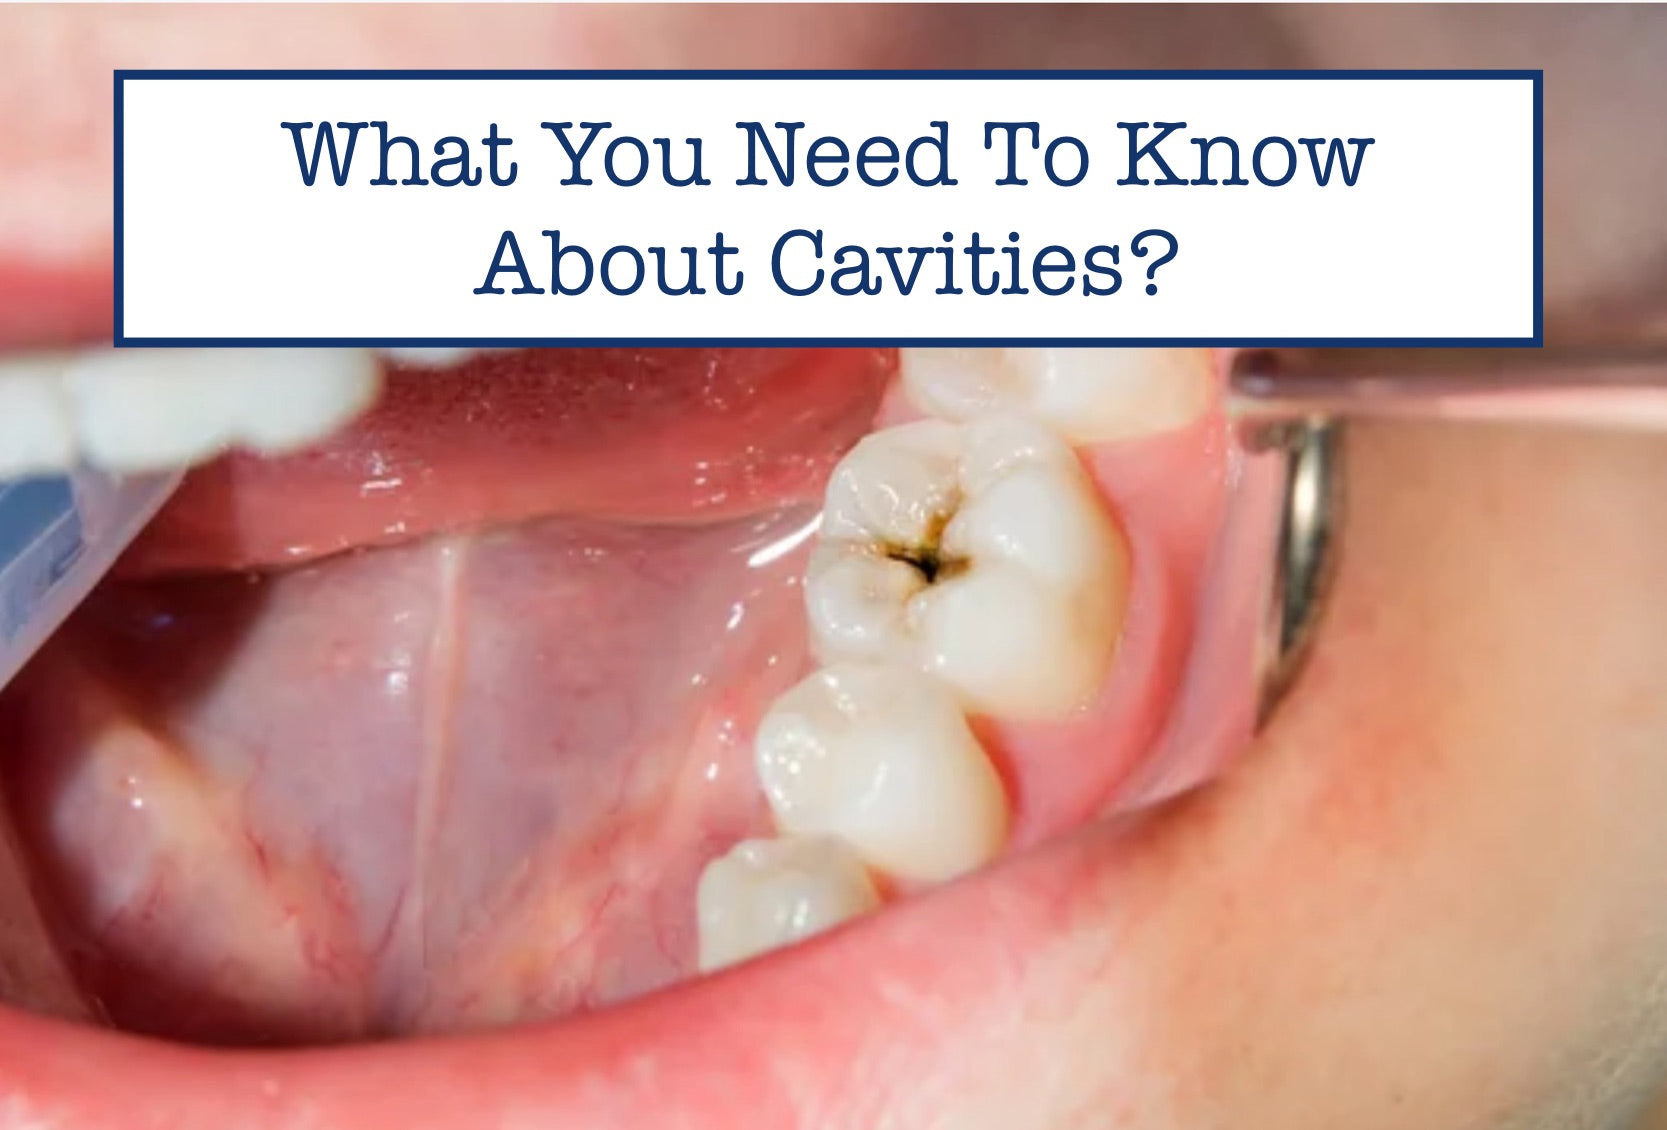 What You Need To Know About Cavities?